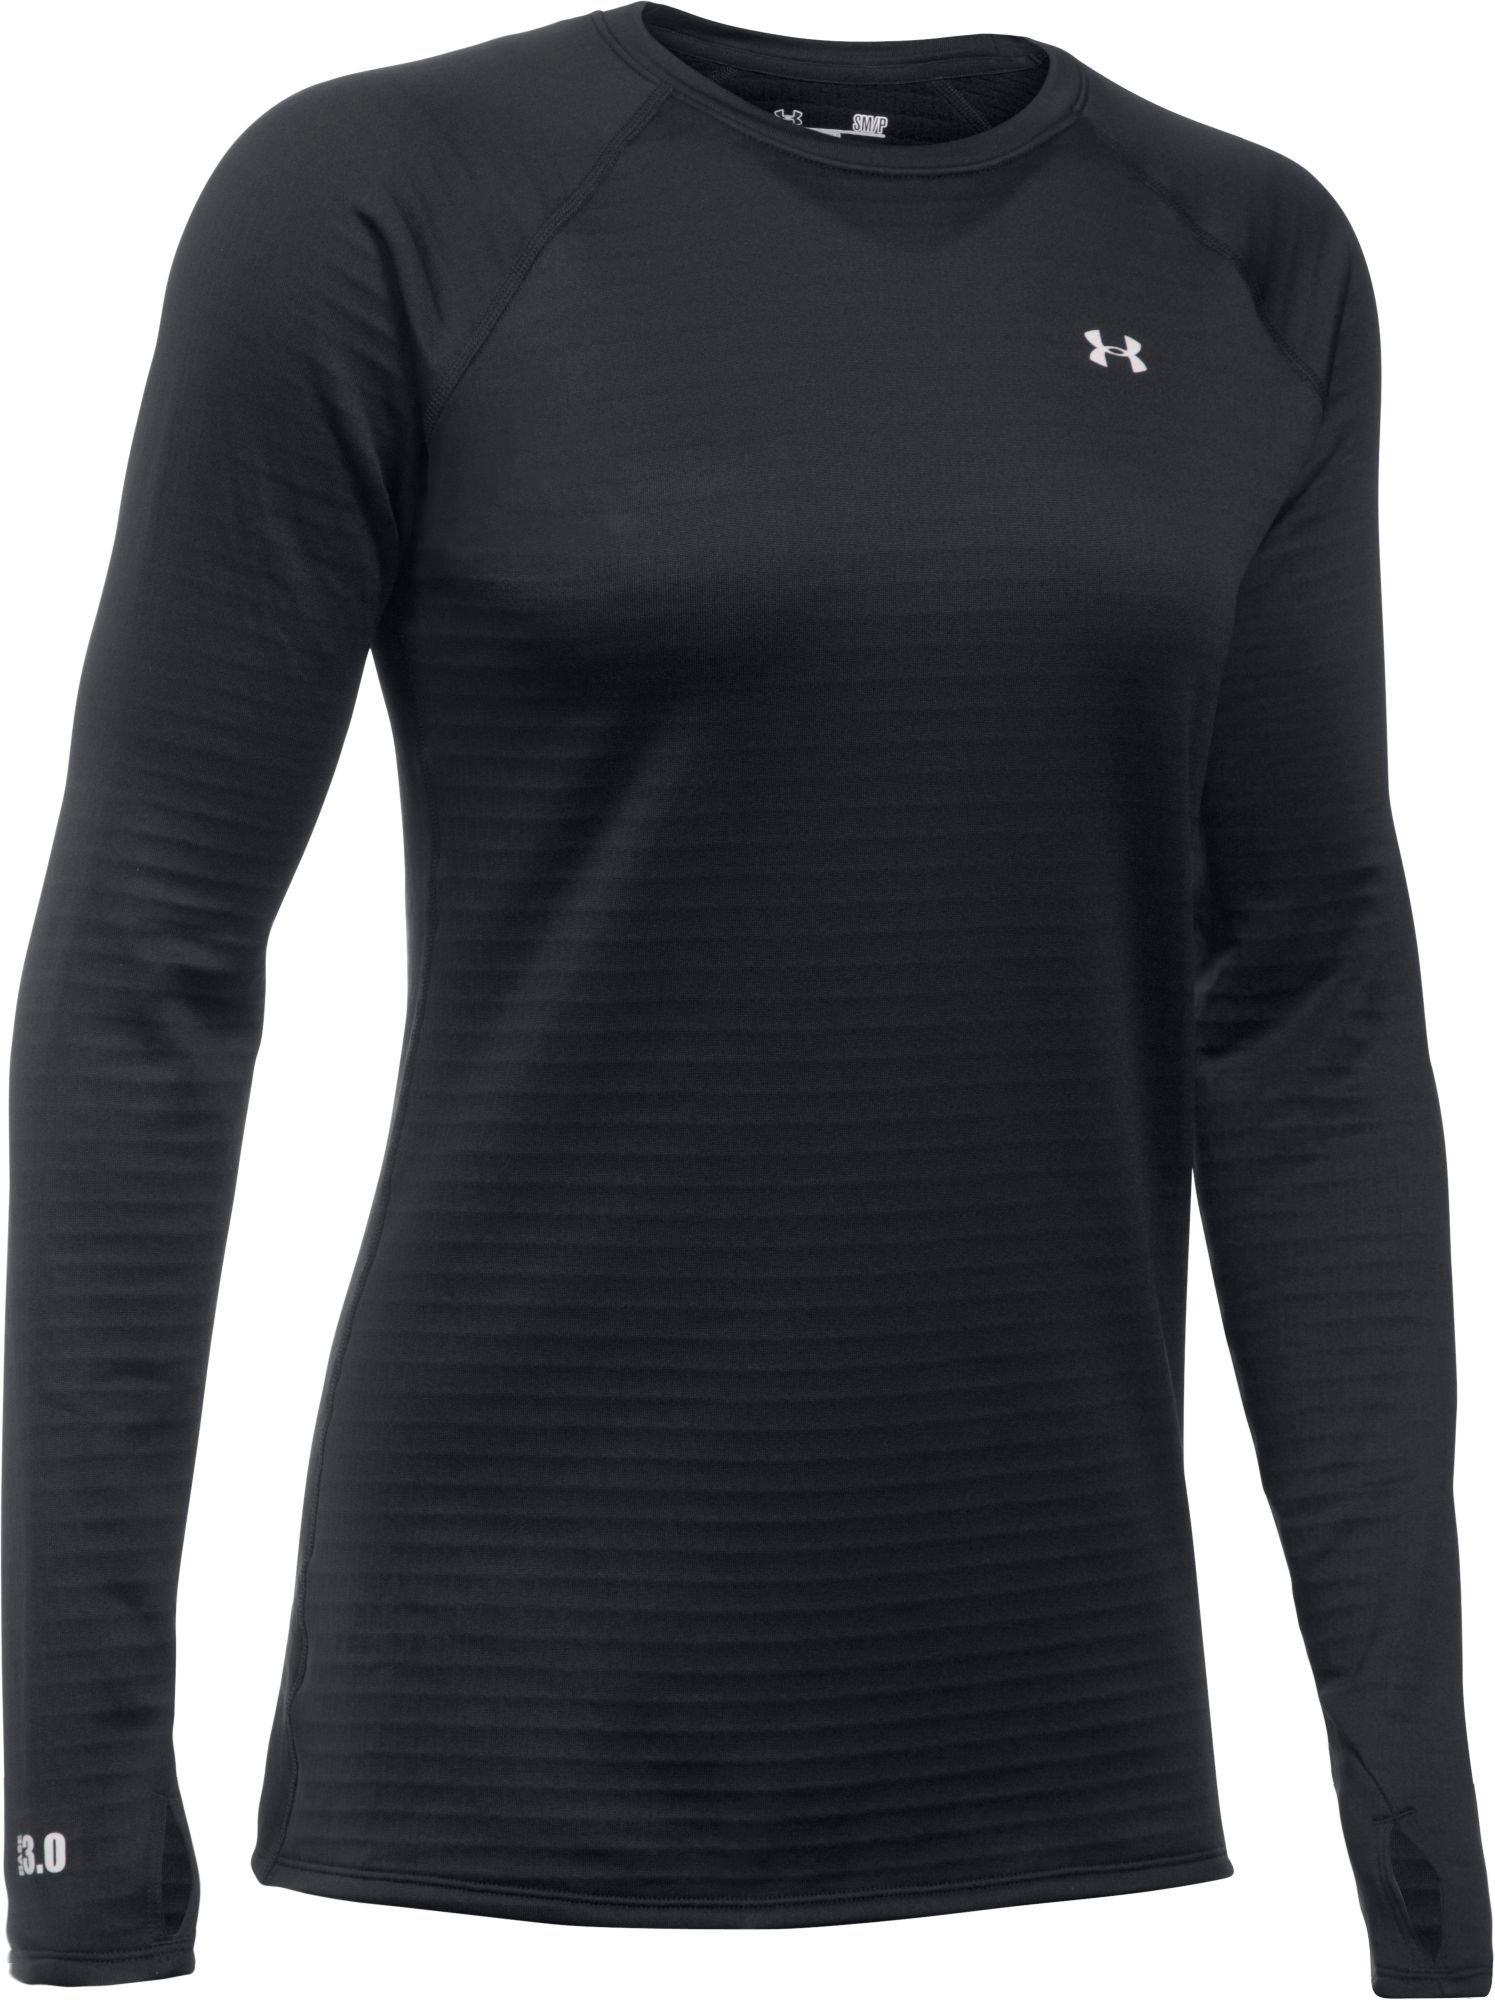 under armor base layer 4.0 womens